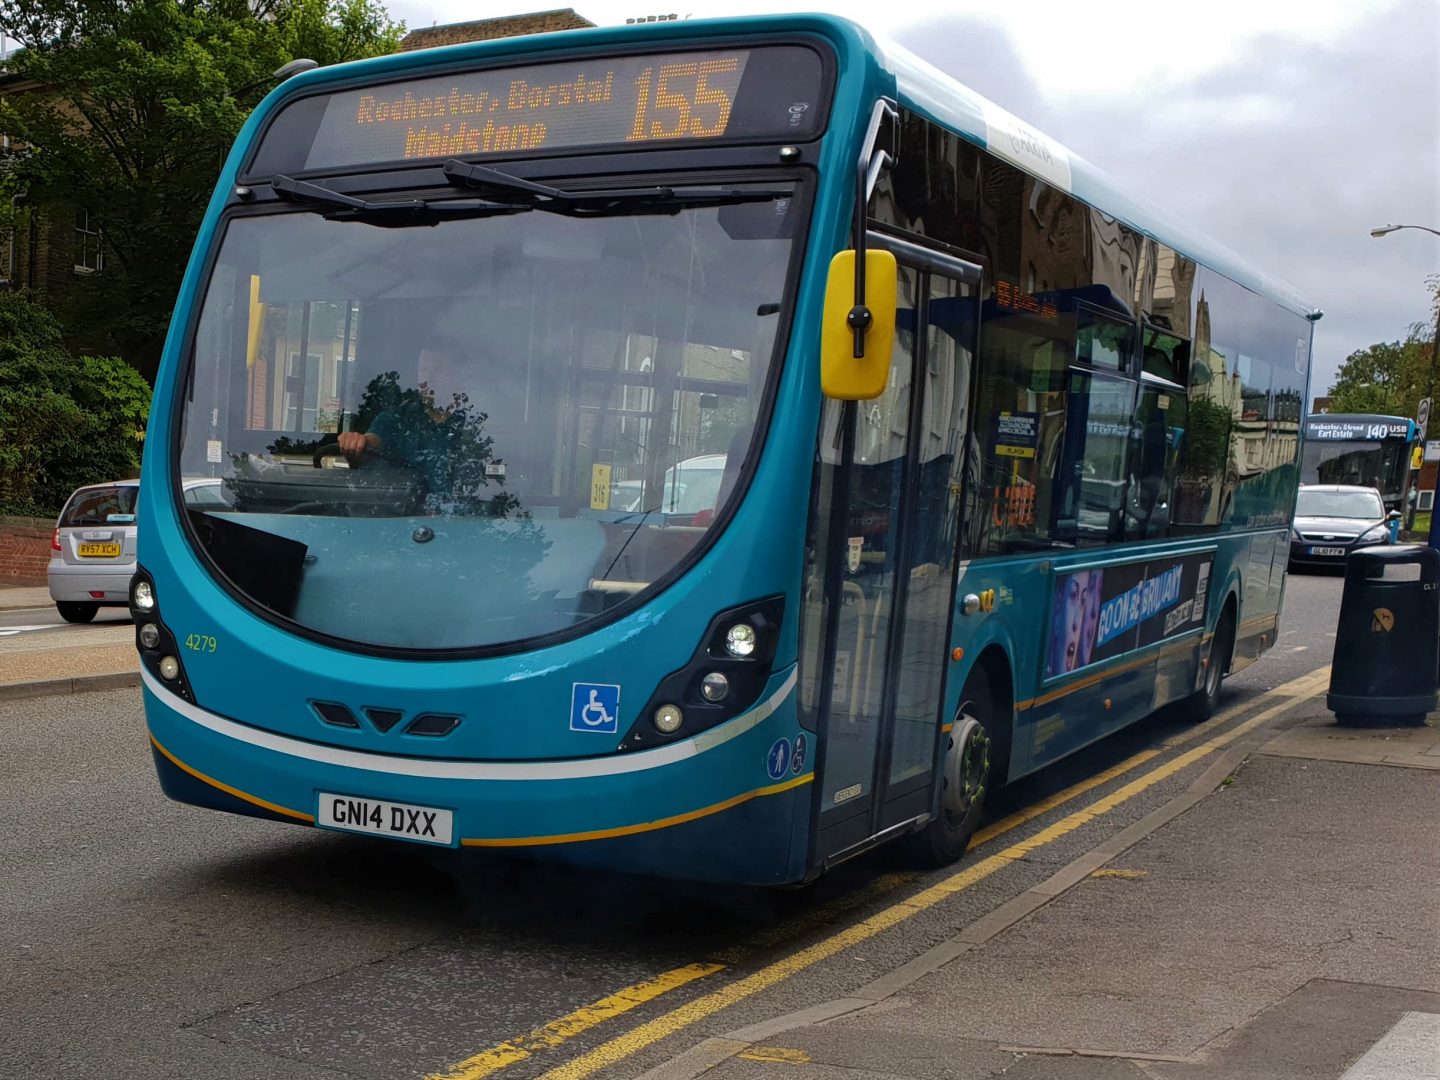 Arriva 155 Chatham to Maidstone bus